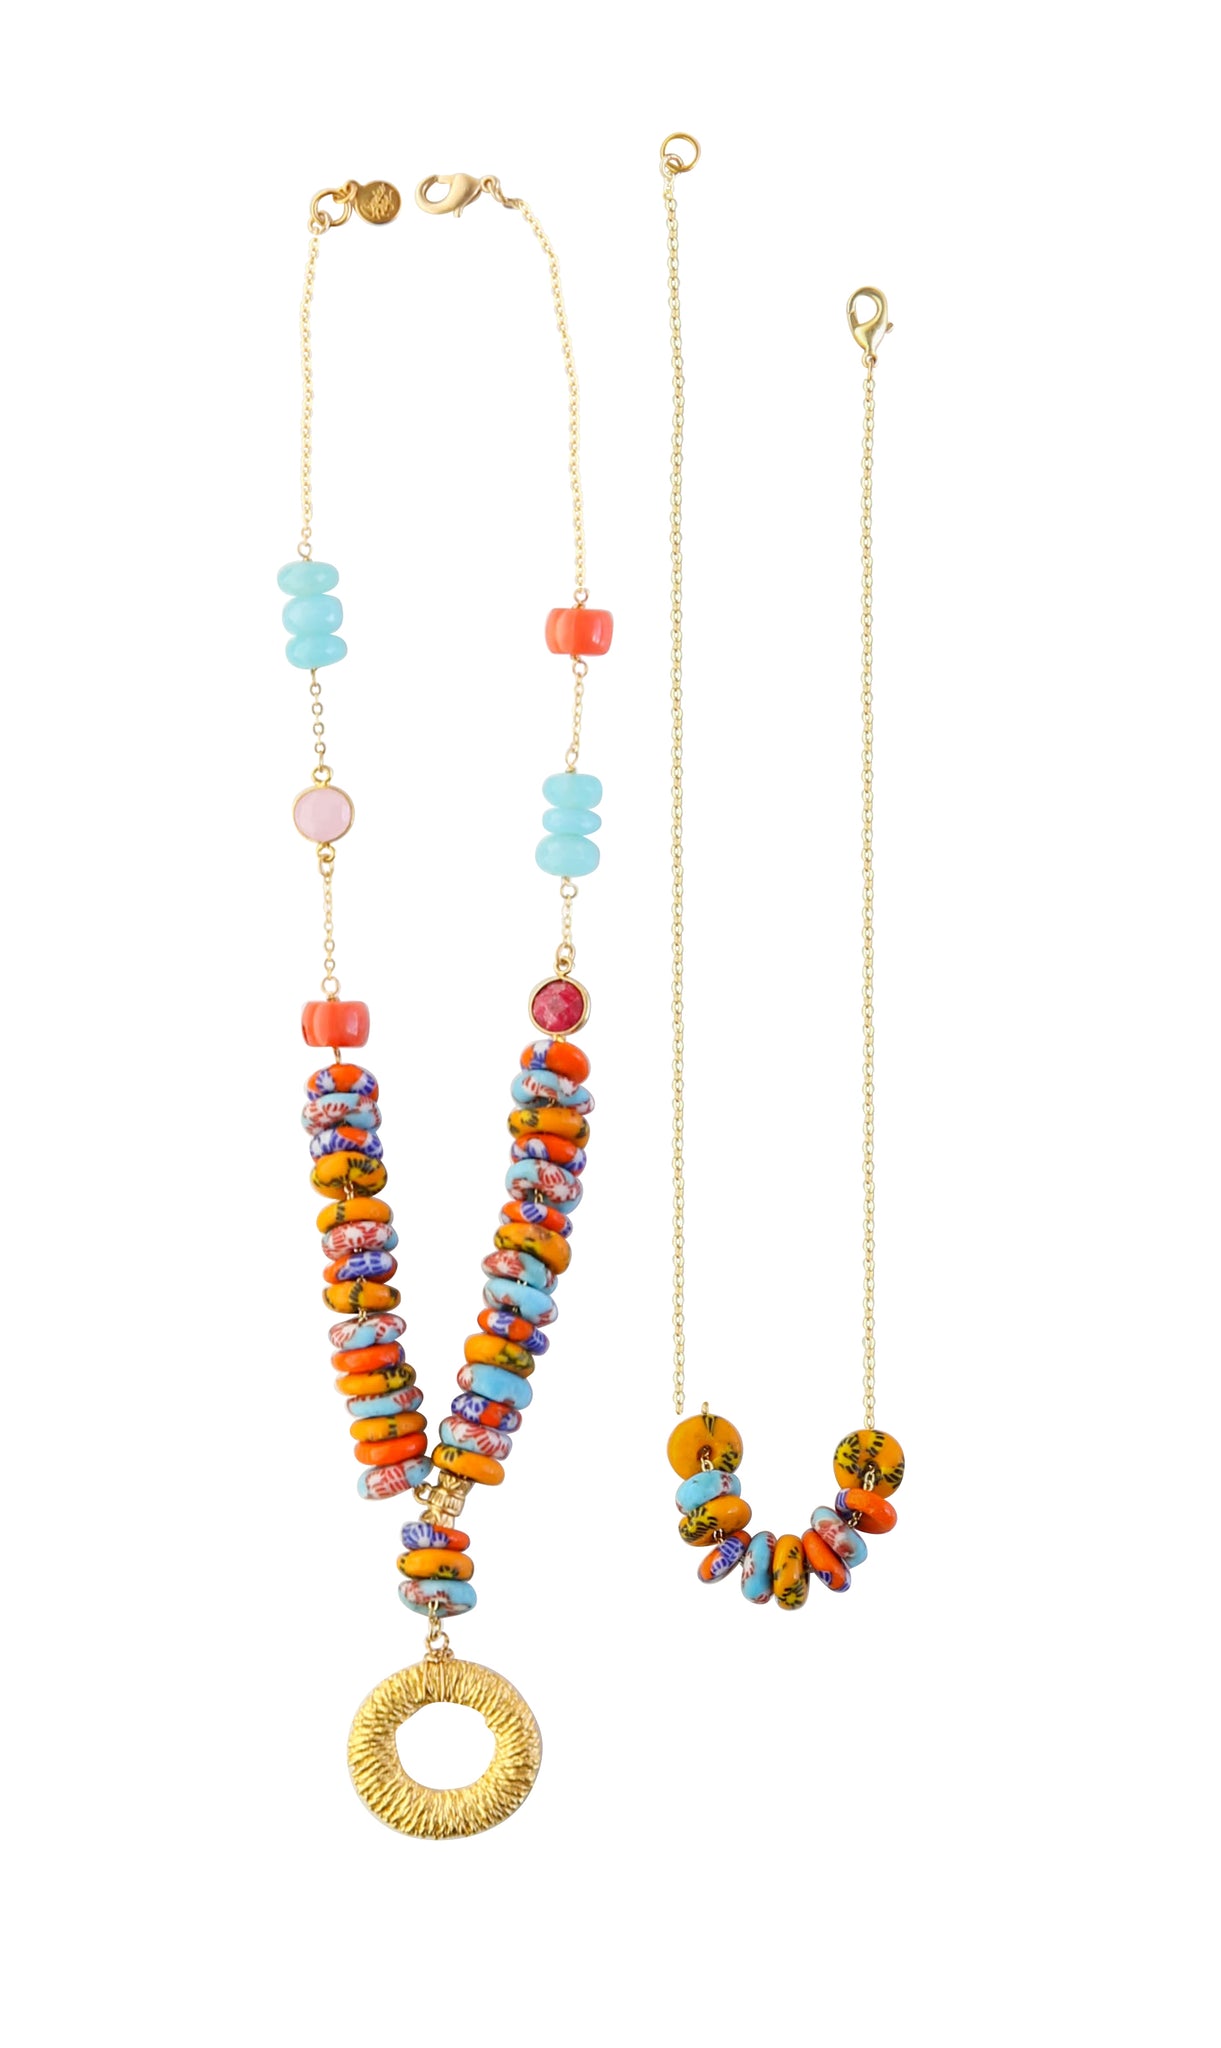 Skittles 4 Way Necklace